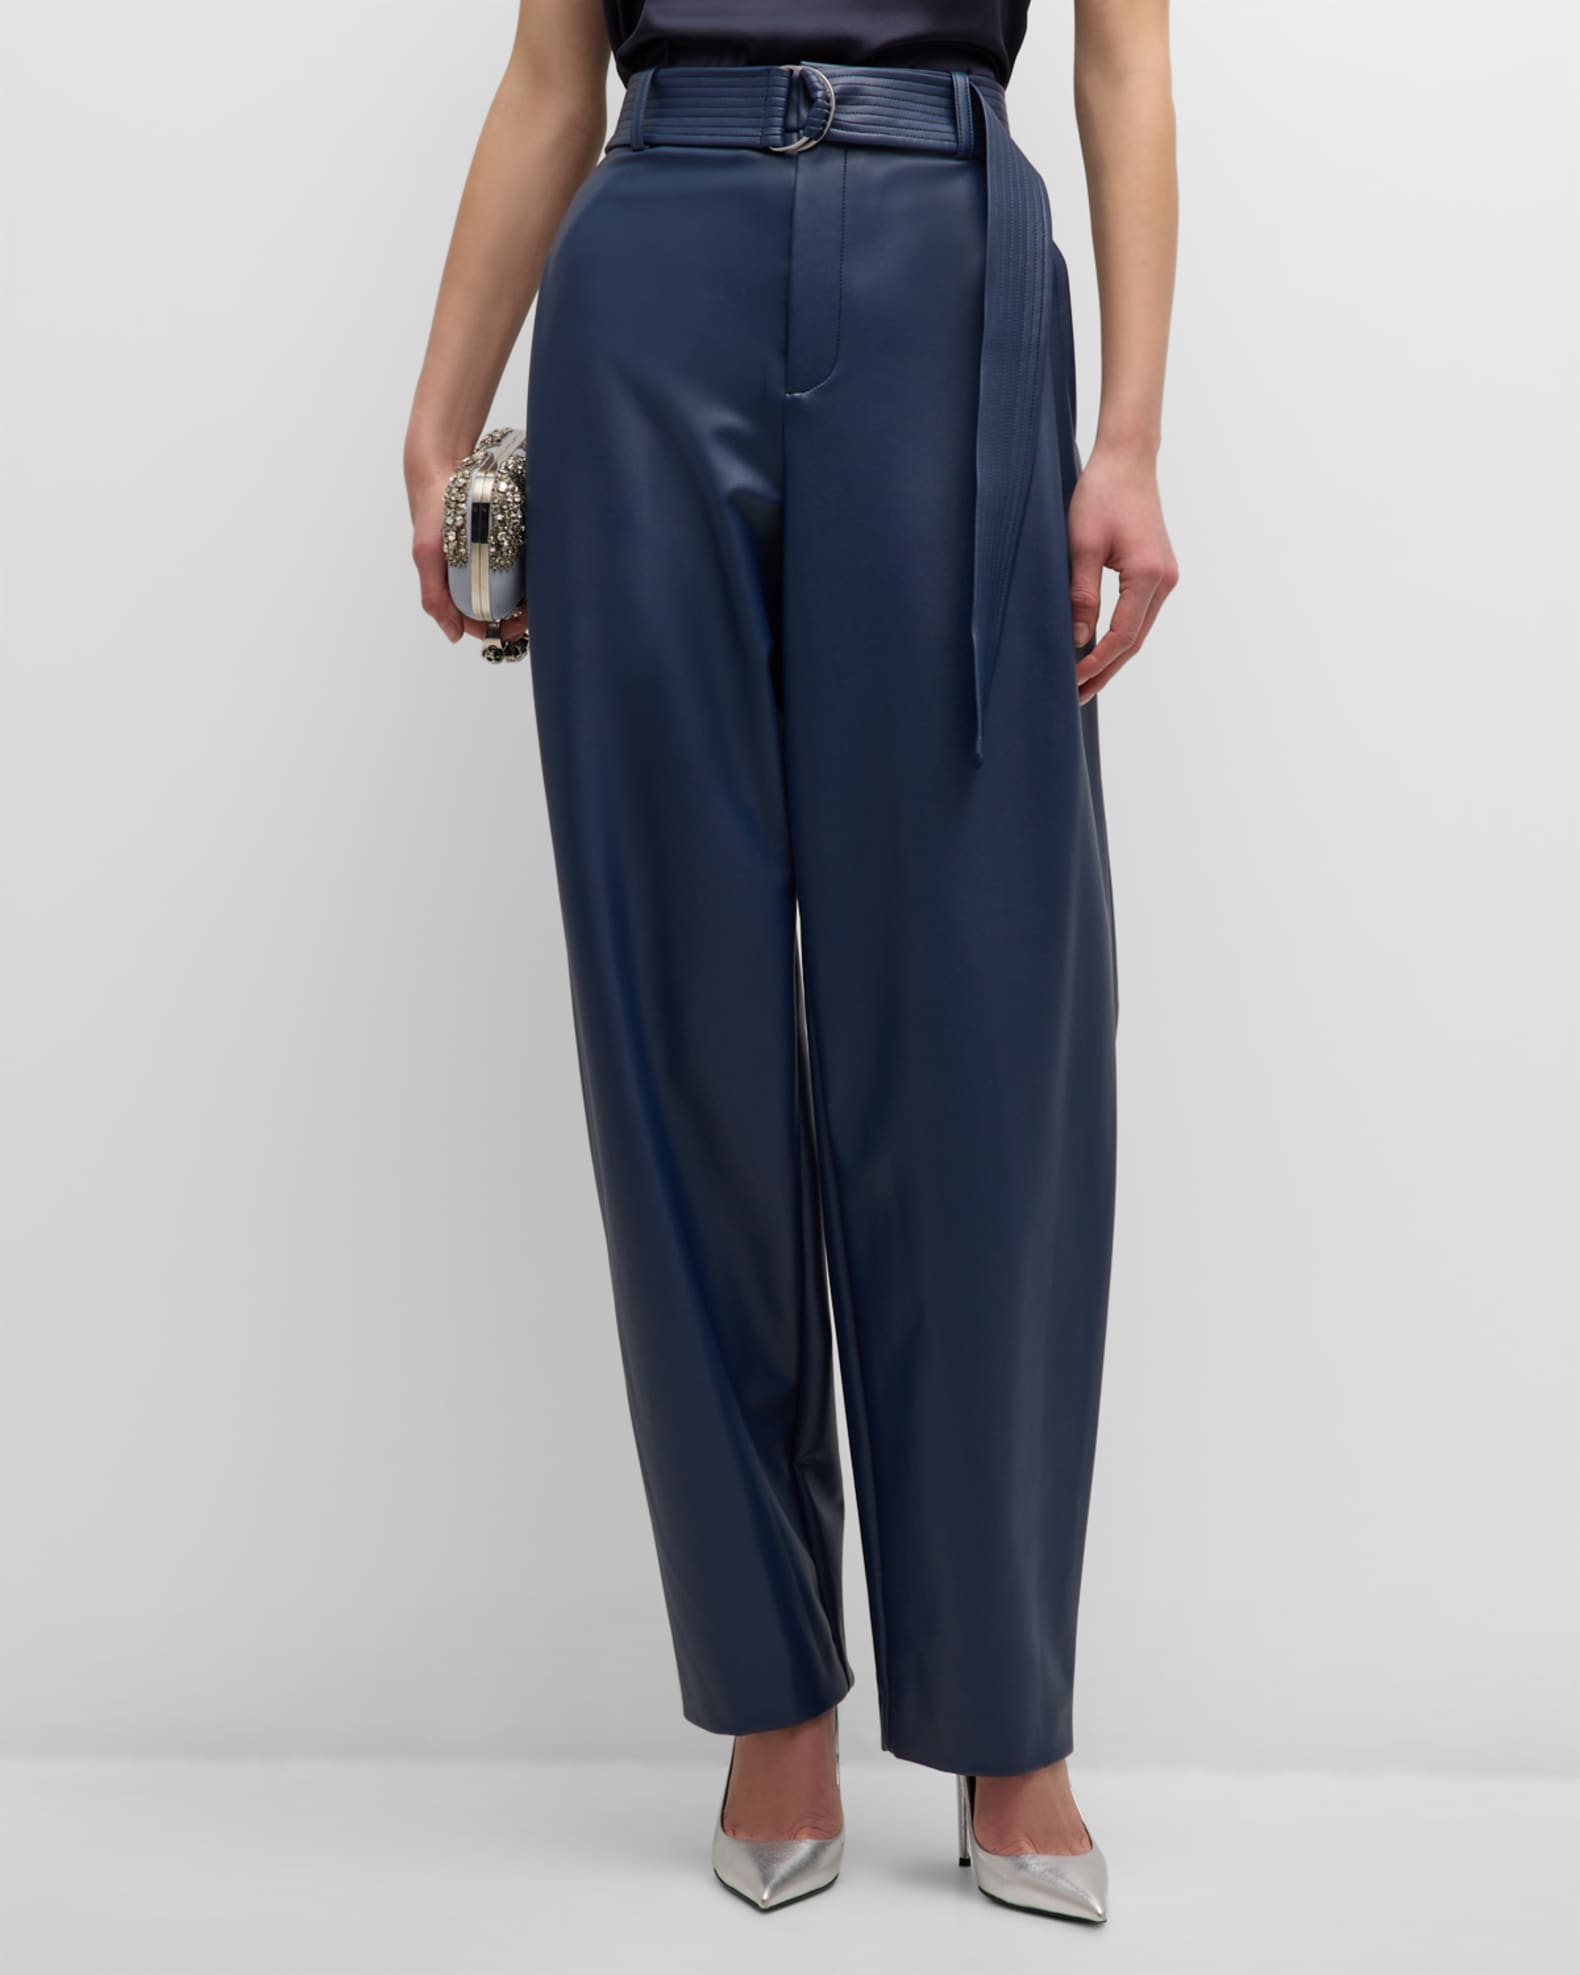 TROUSERS WITH SATIN WAISTBAND - Anthracite grey